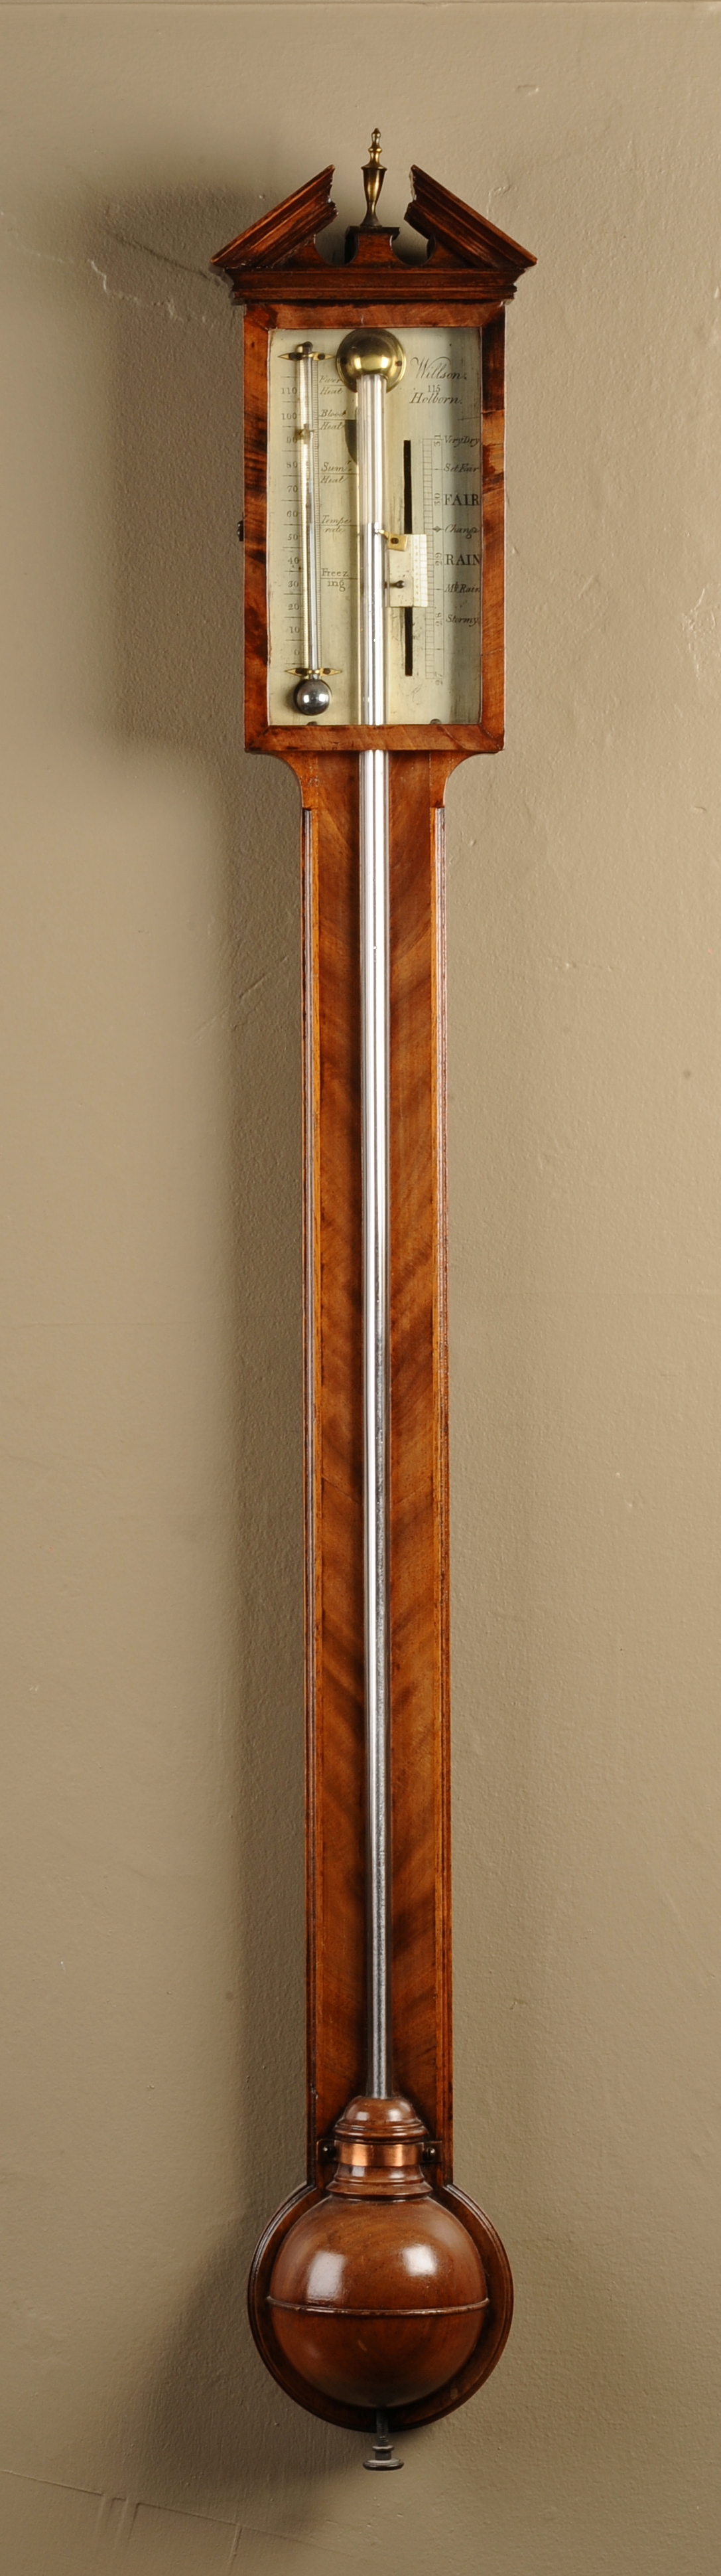 A GEORGE III MAHOGANY STICK BAROMETER, with an architectural pediment, the silvered register